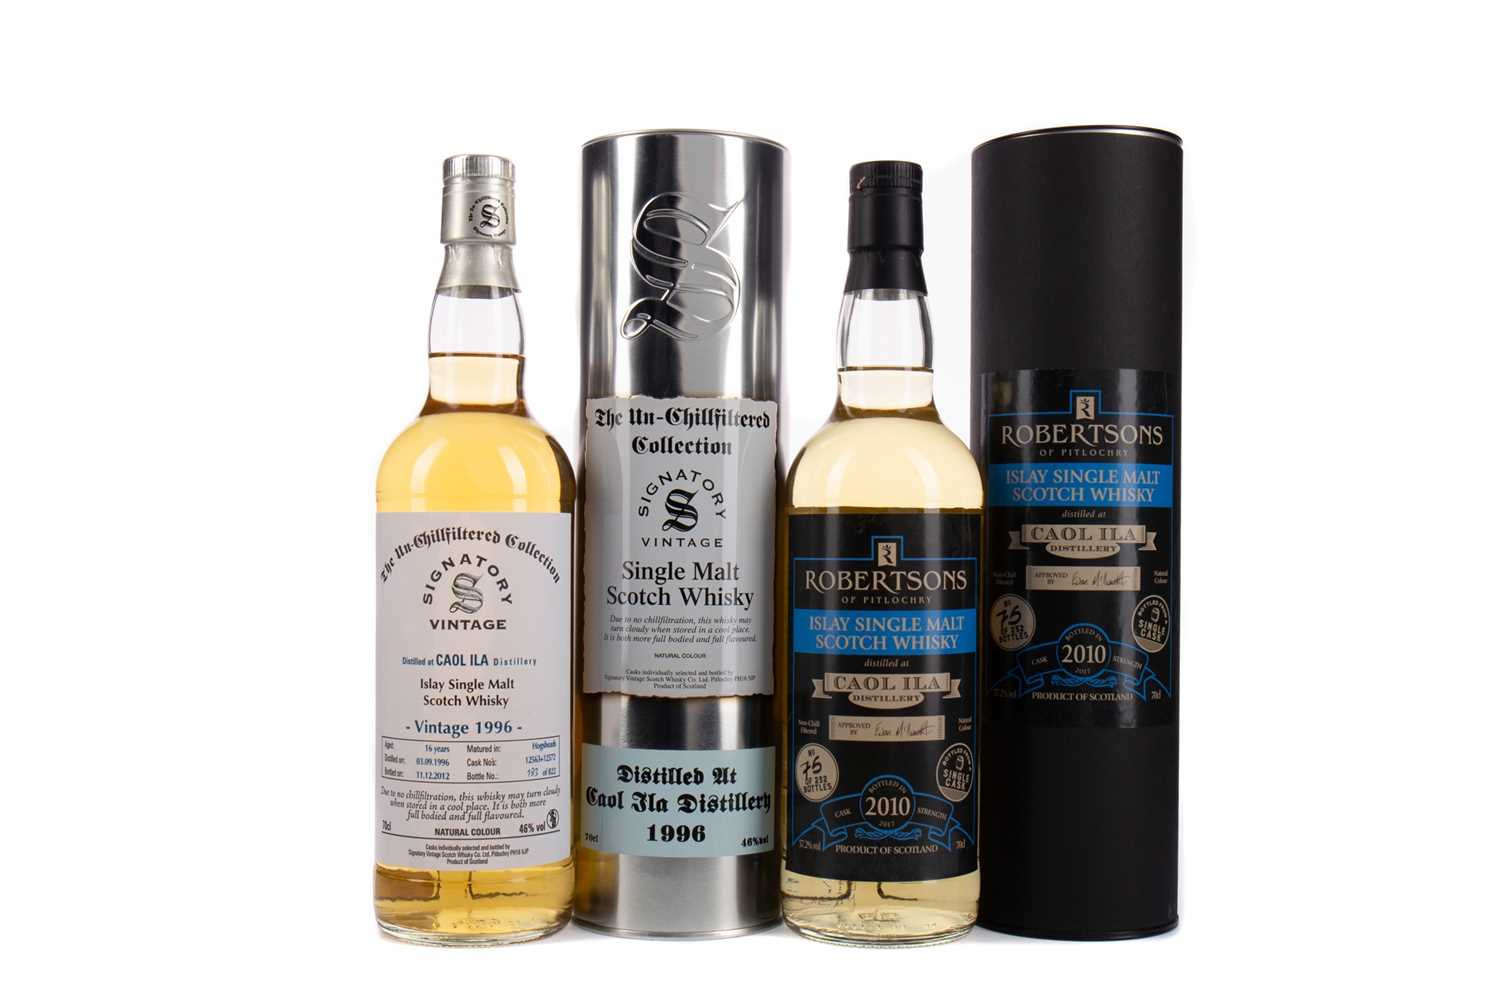 Lot 35 - CAOL ILA 1996 SIGNATOR VINTAGE AGED 16 YEARS, AND CAOL ILA 2010 ROBERTSONS OF PITLOCHRY